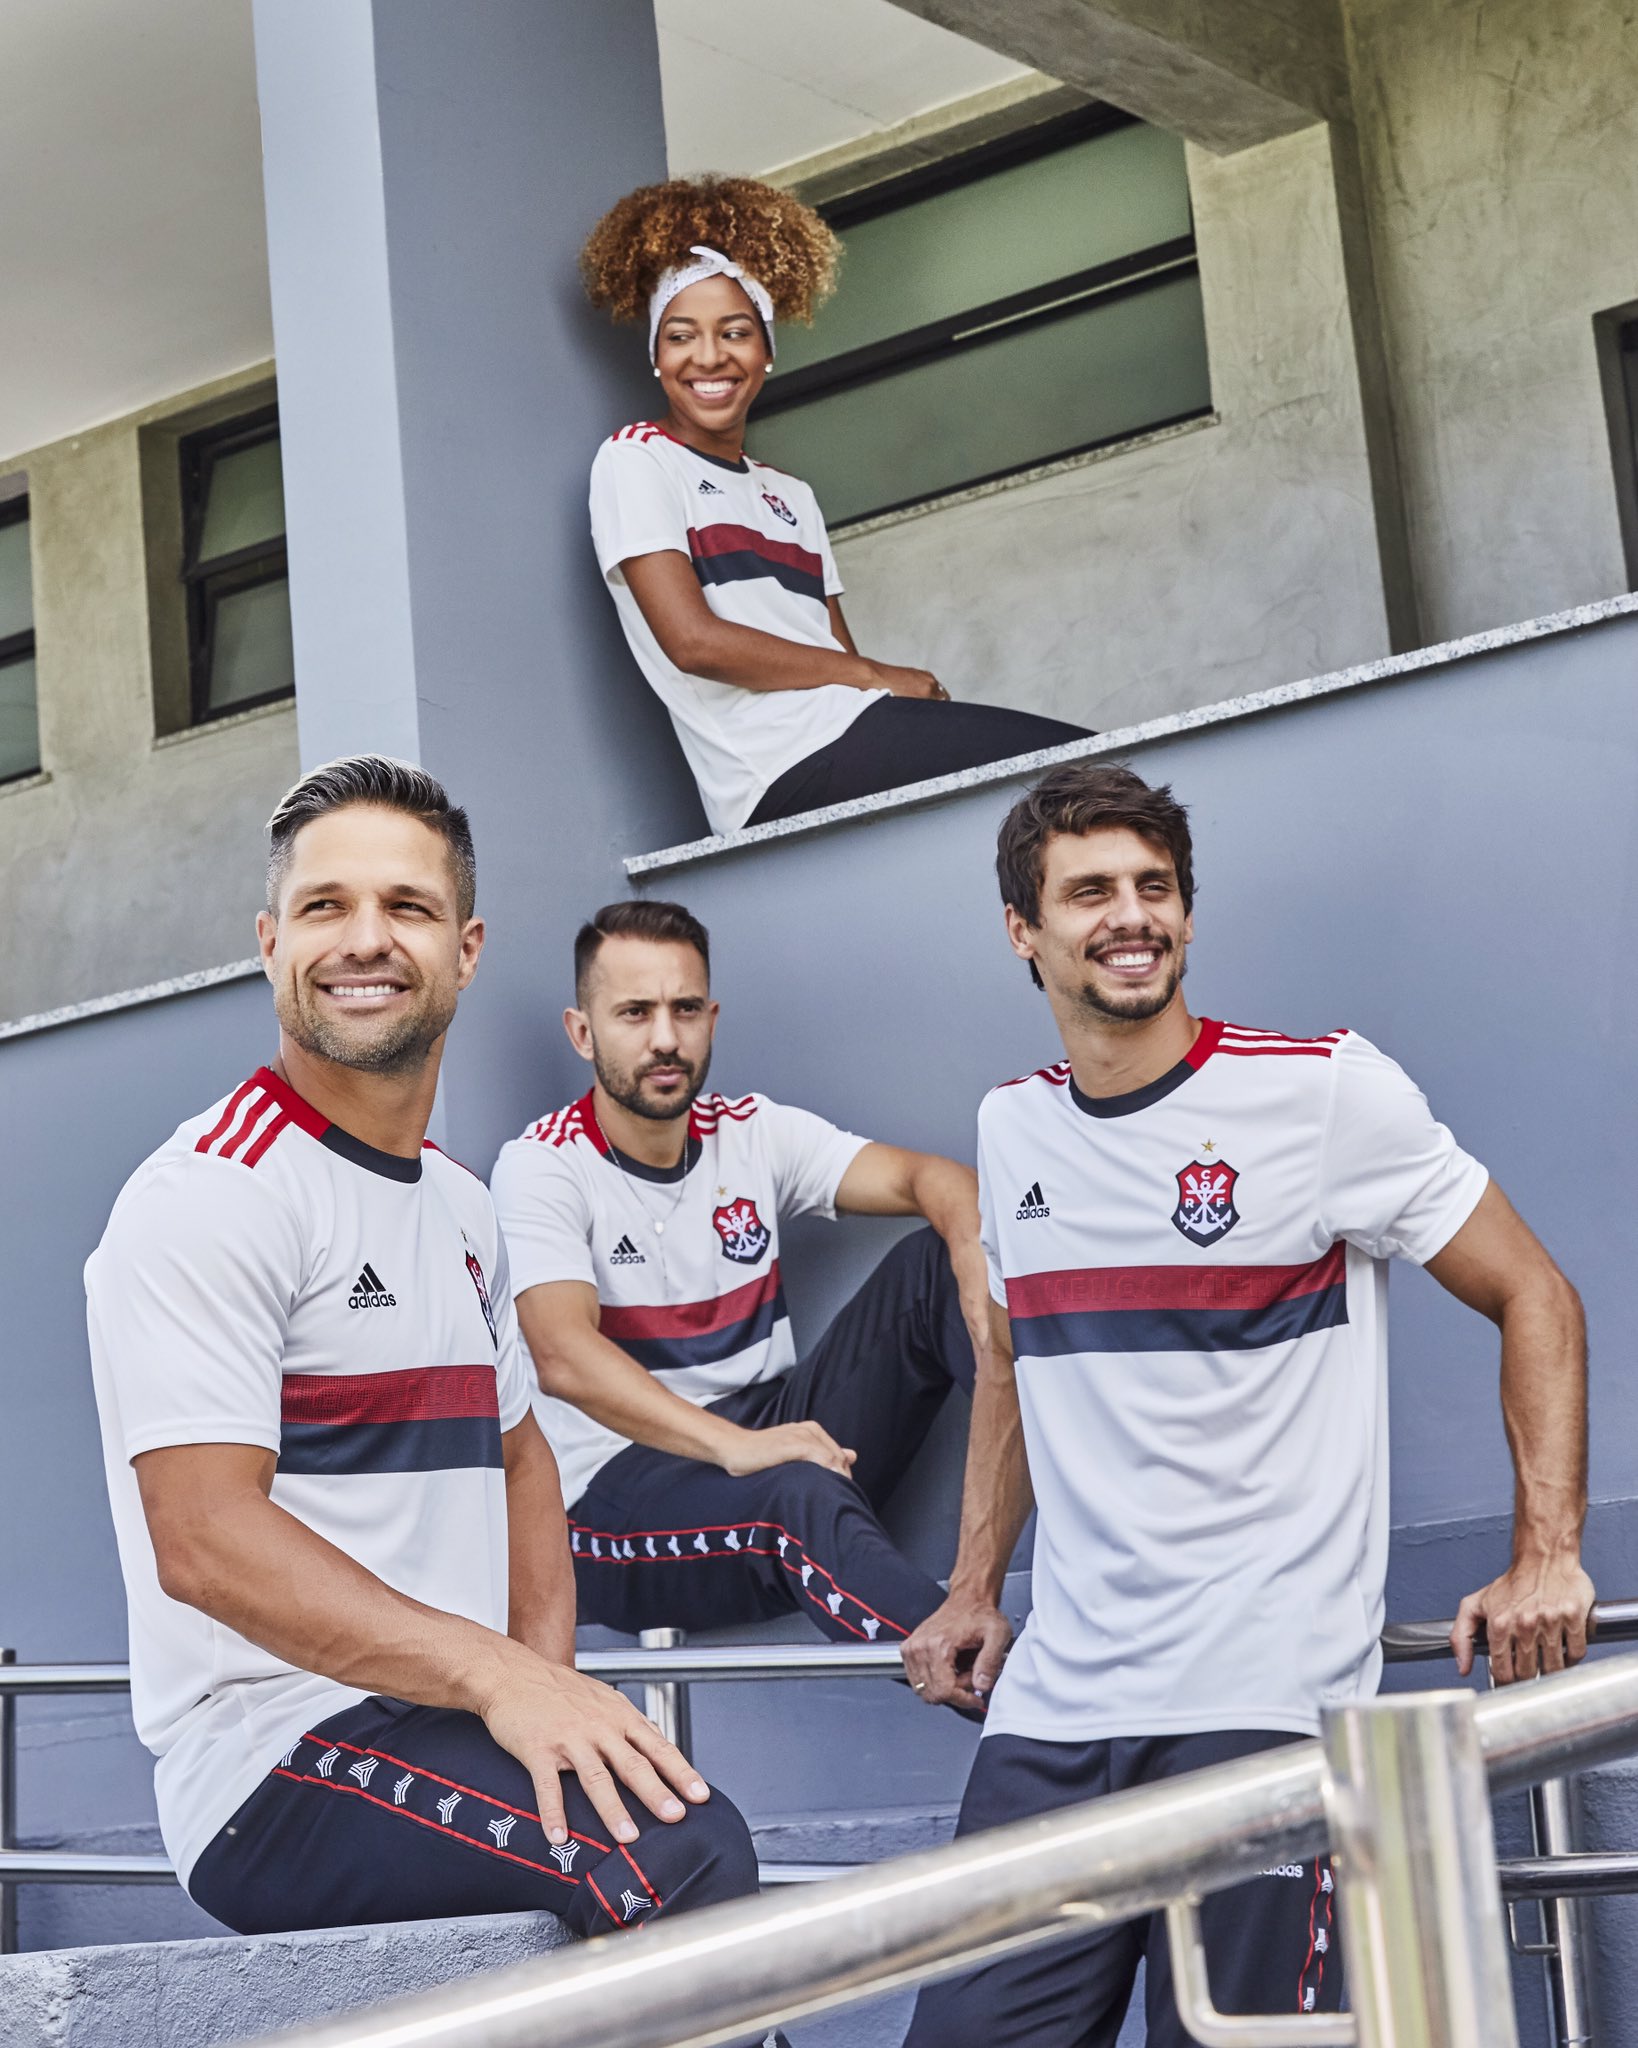 farmers Stereotype come adidas Football on Twitter: "Introducing the new @Flamengo 2019/20 Away  kit, exclusively available now through adidas and official club stores.  #DareToCreate https://t.co/HrTJZg0KAM" / Twitter